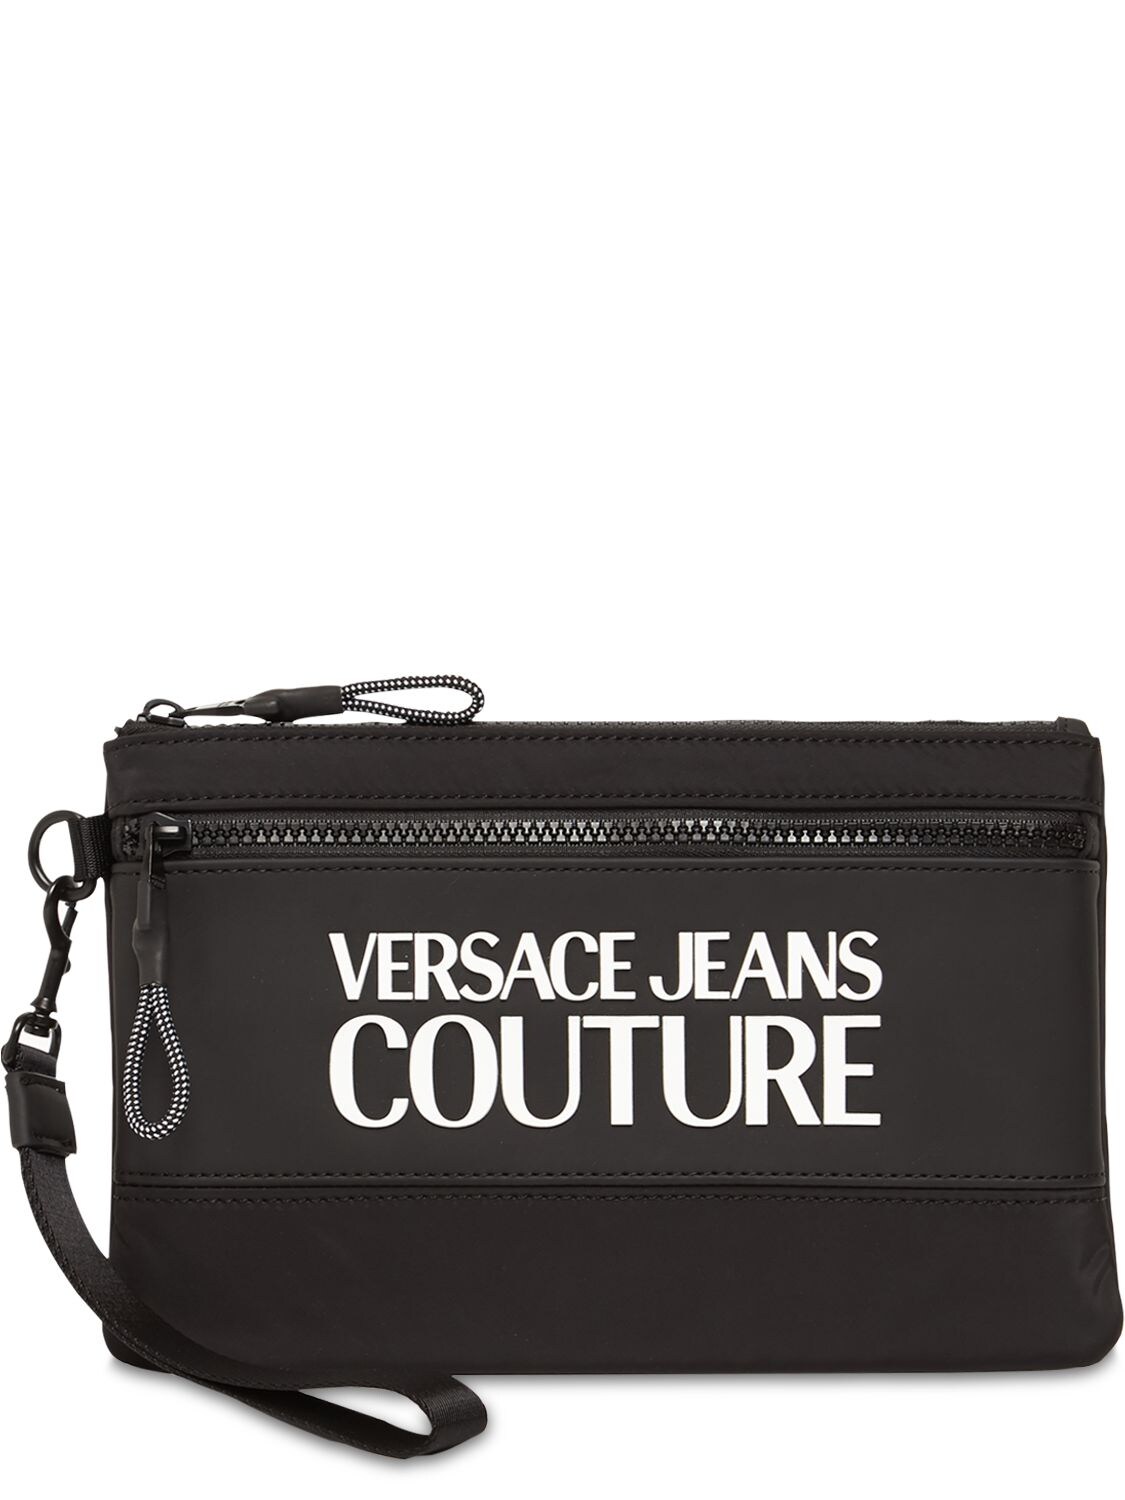 Versace Jeans Couture Rubberized Logo Clutch In Black